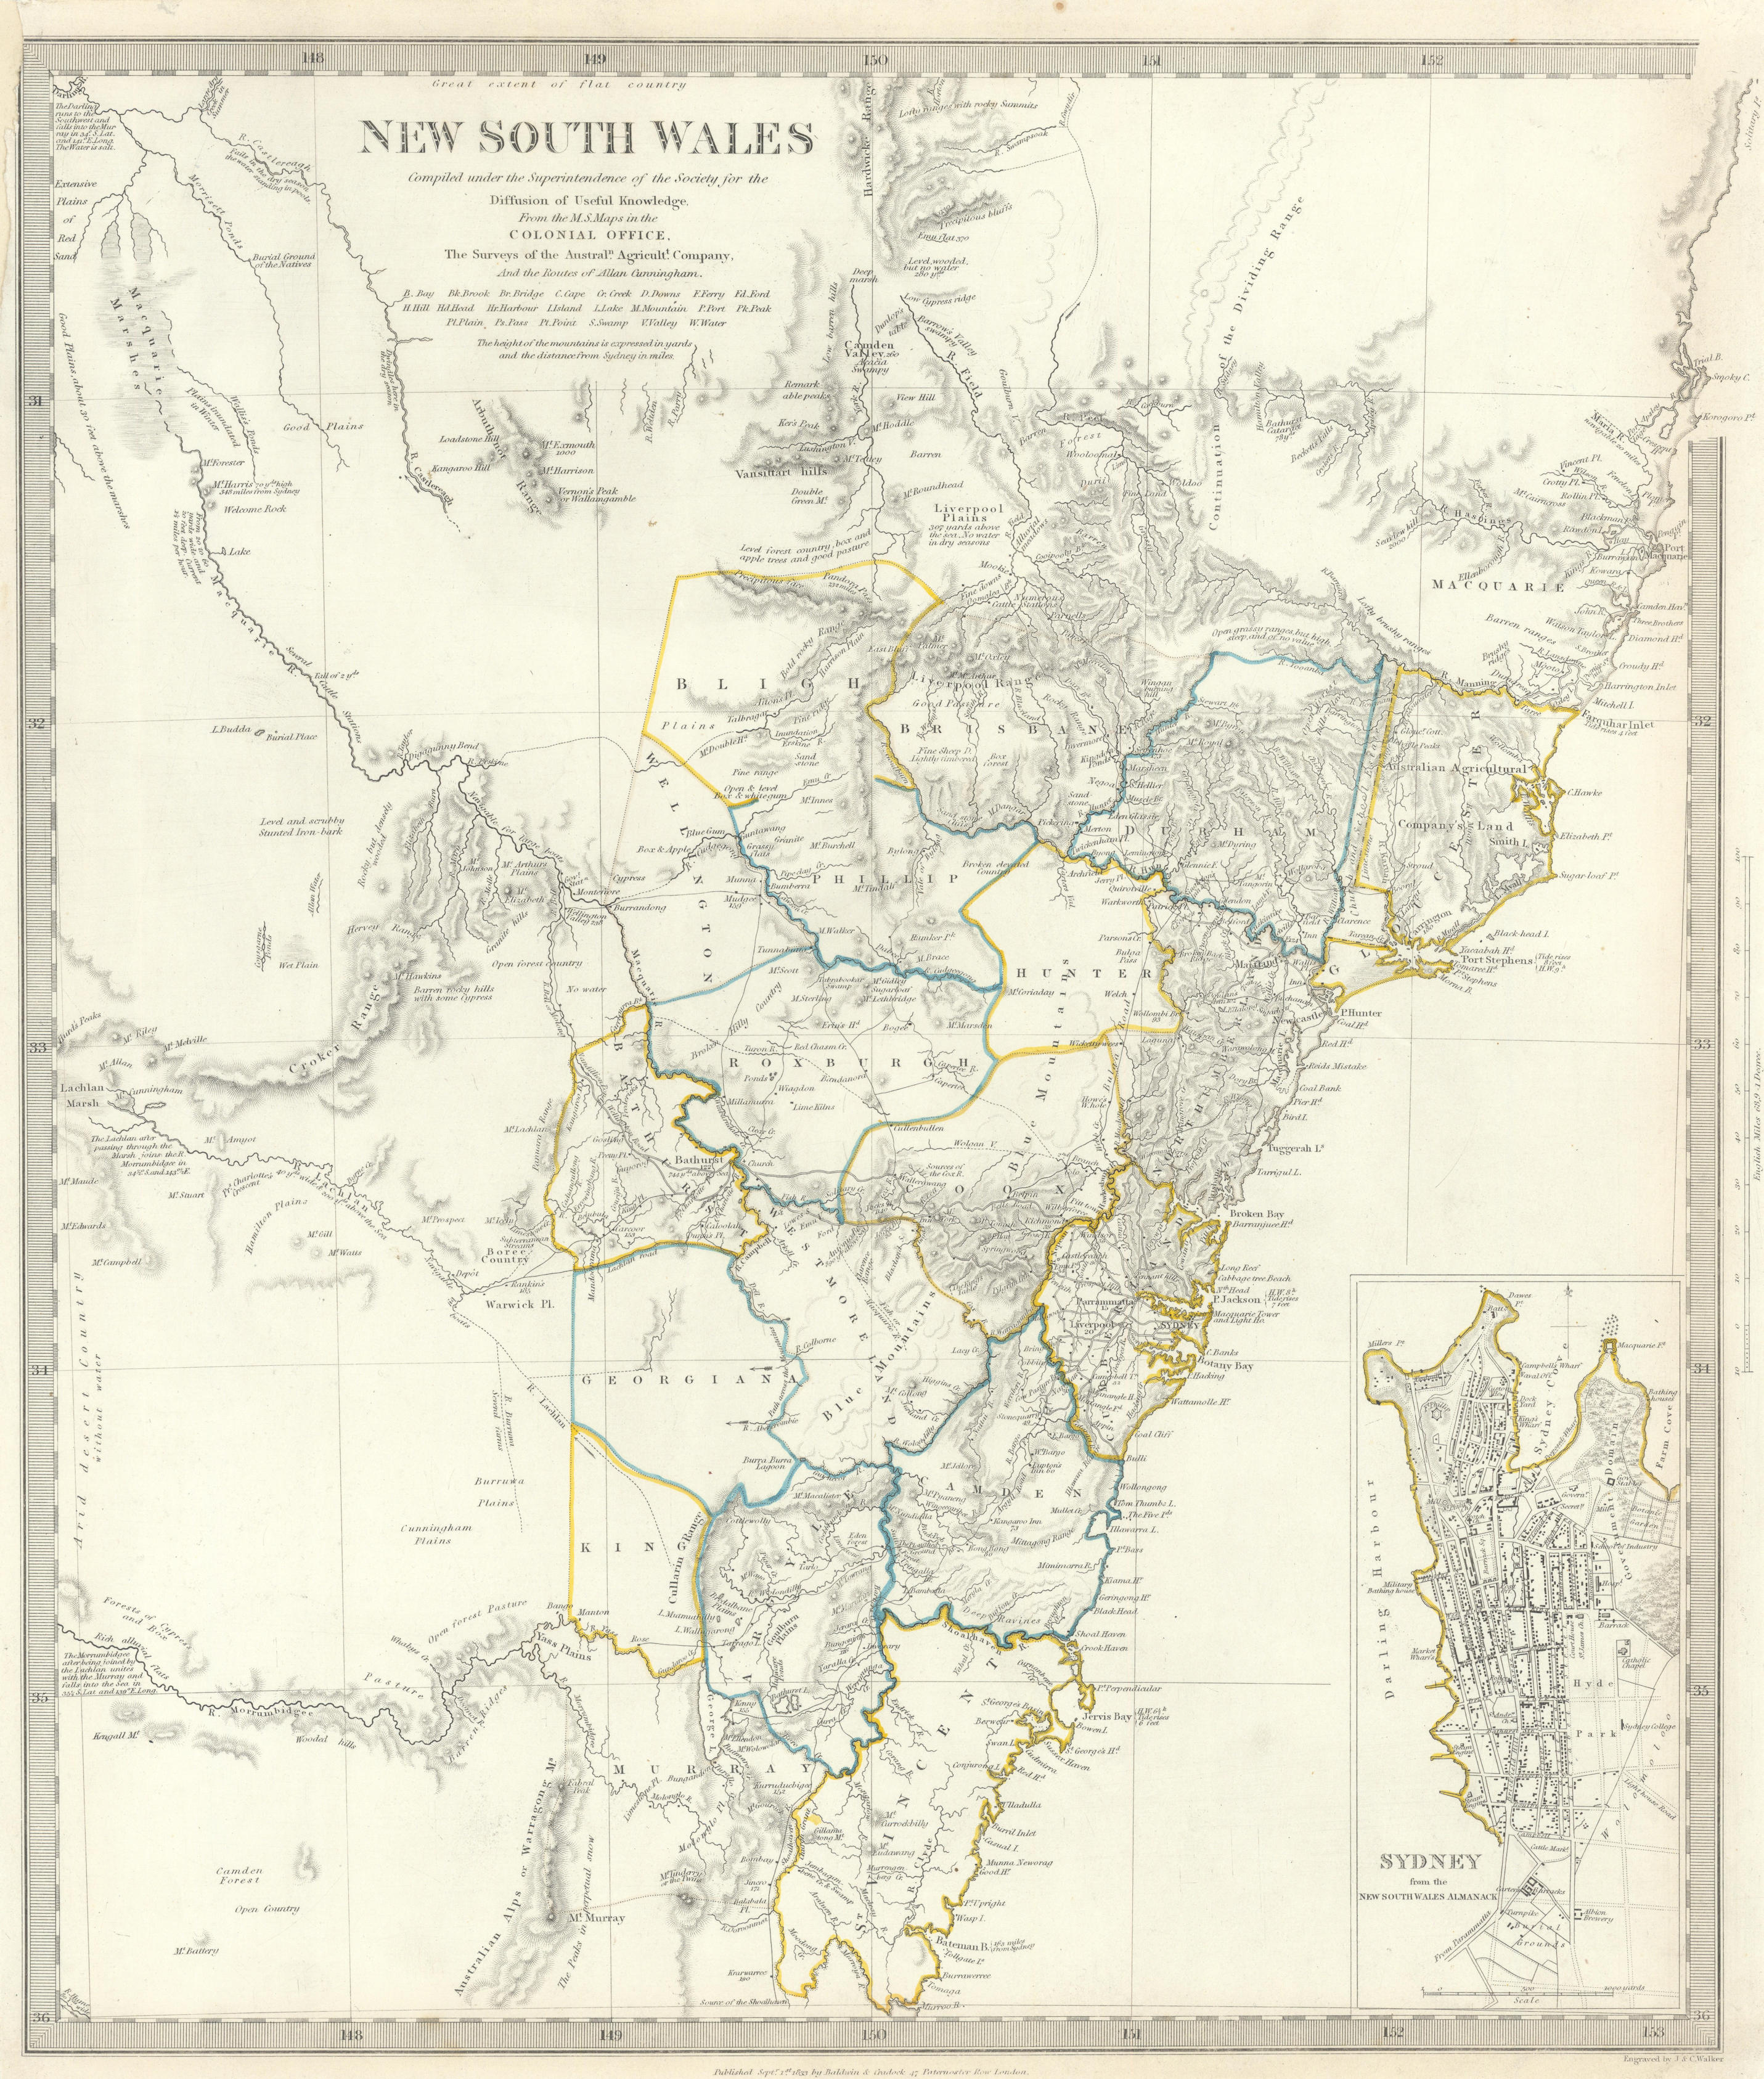 Associate Product NEW SOUTH WALES. based on Cunningham routes. Inset Sydney plan. SDUK 1844 map